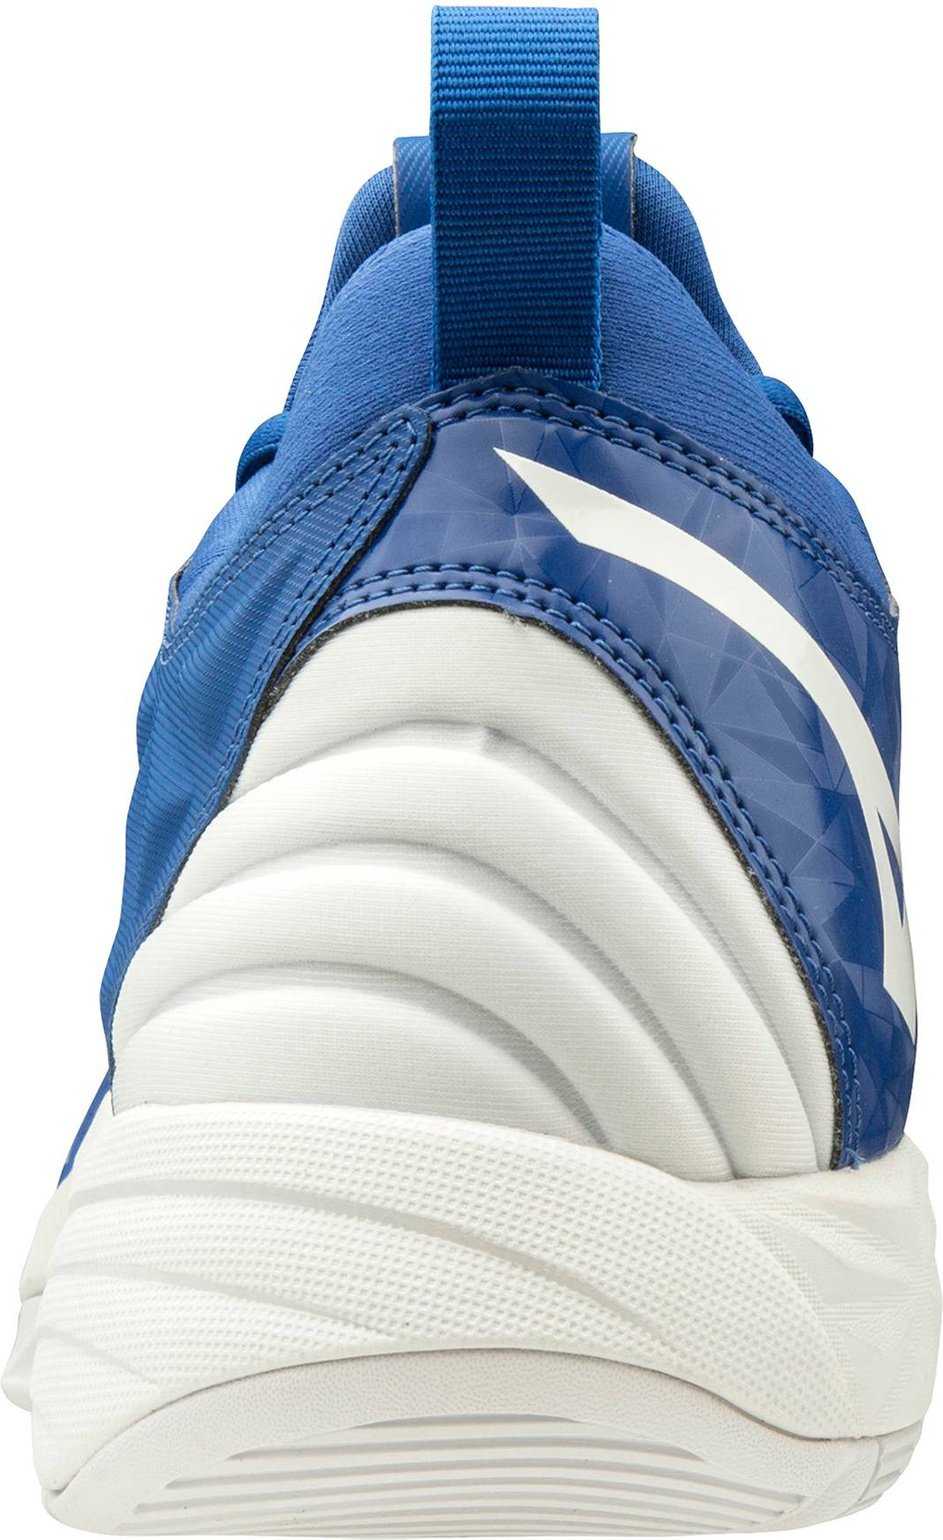 Mizuno Wave Momentum Mens Volleyball Shoes - Royal White